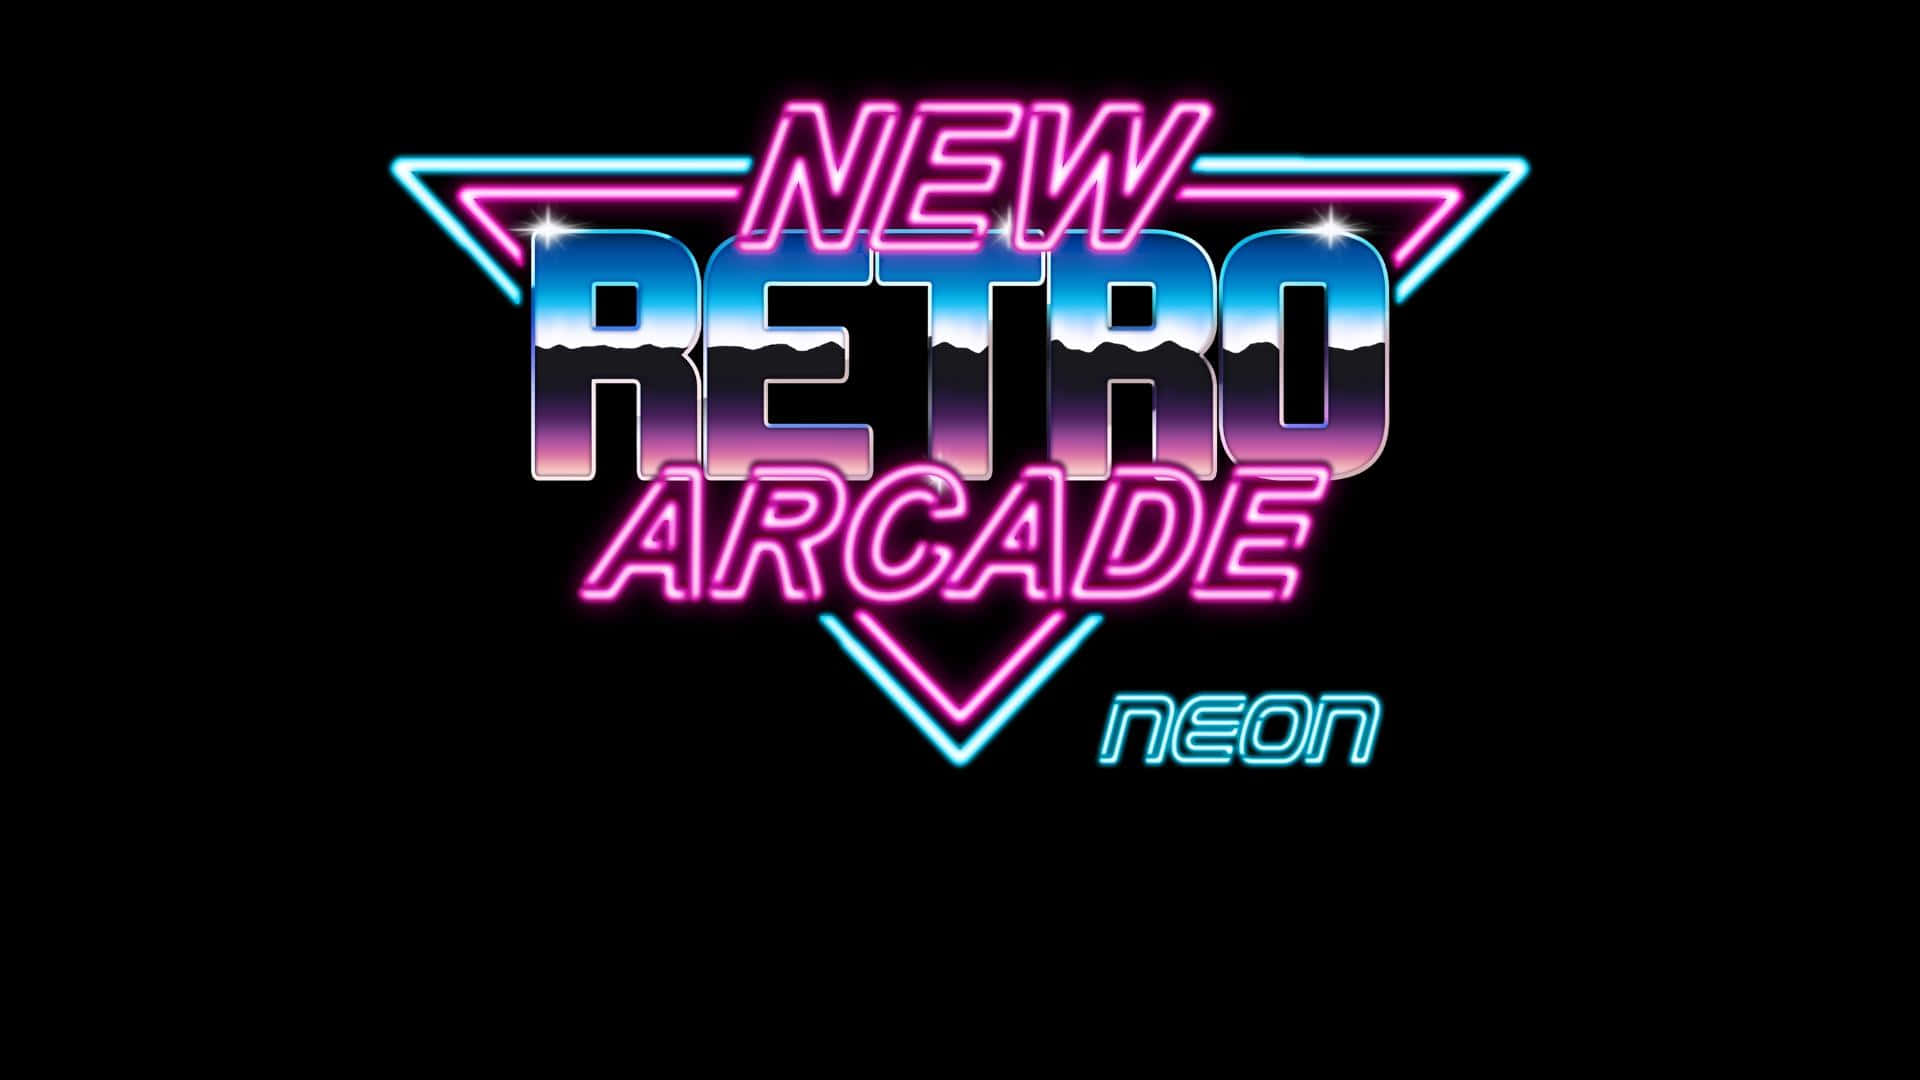 "Take a step back in time with Arcade Aesthetic!" Wallpaper